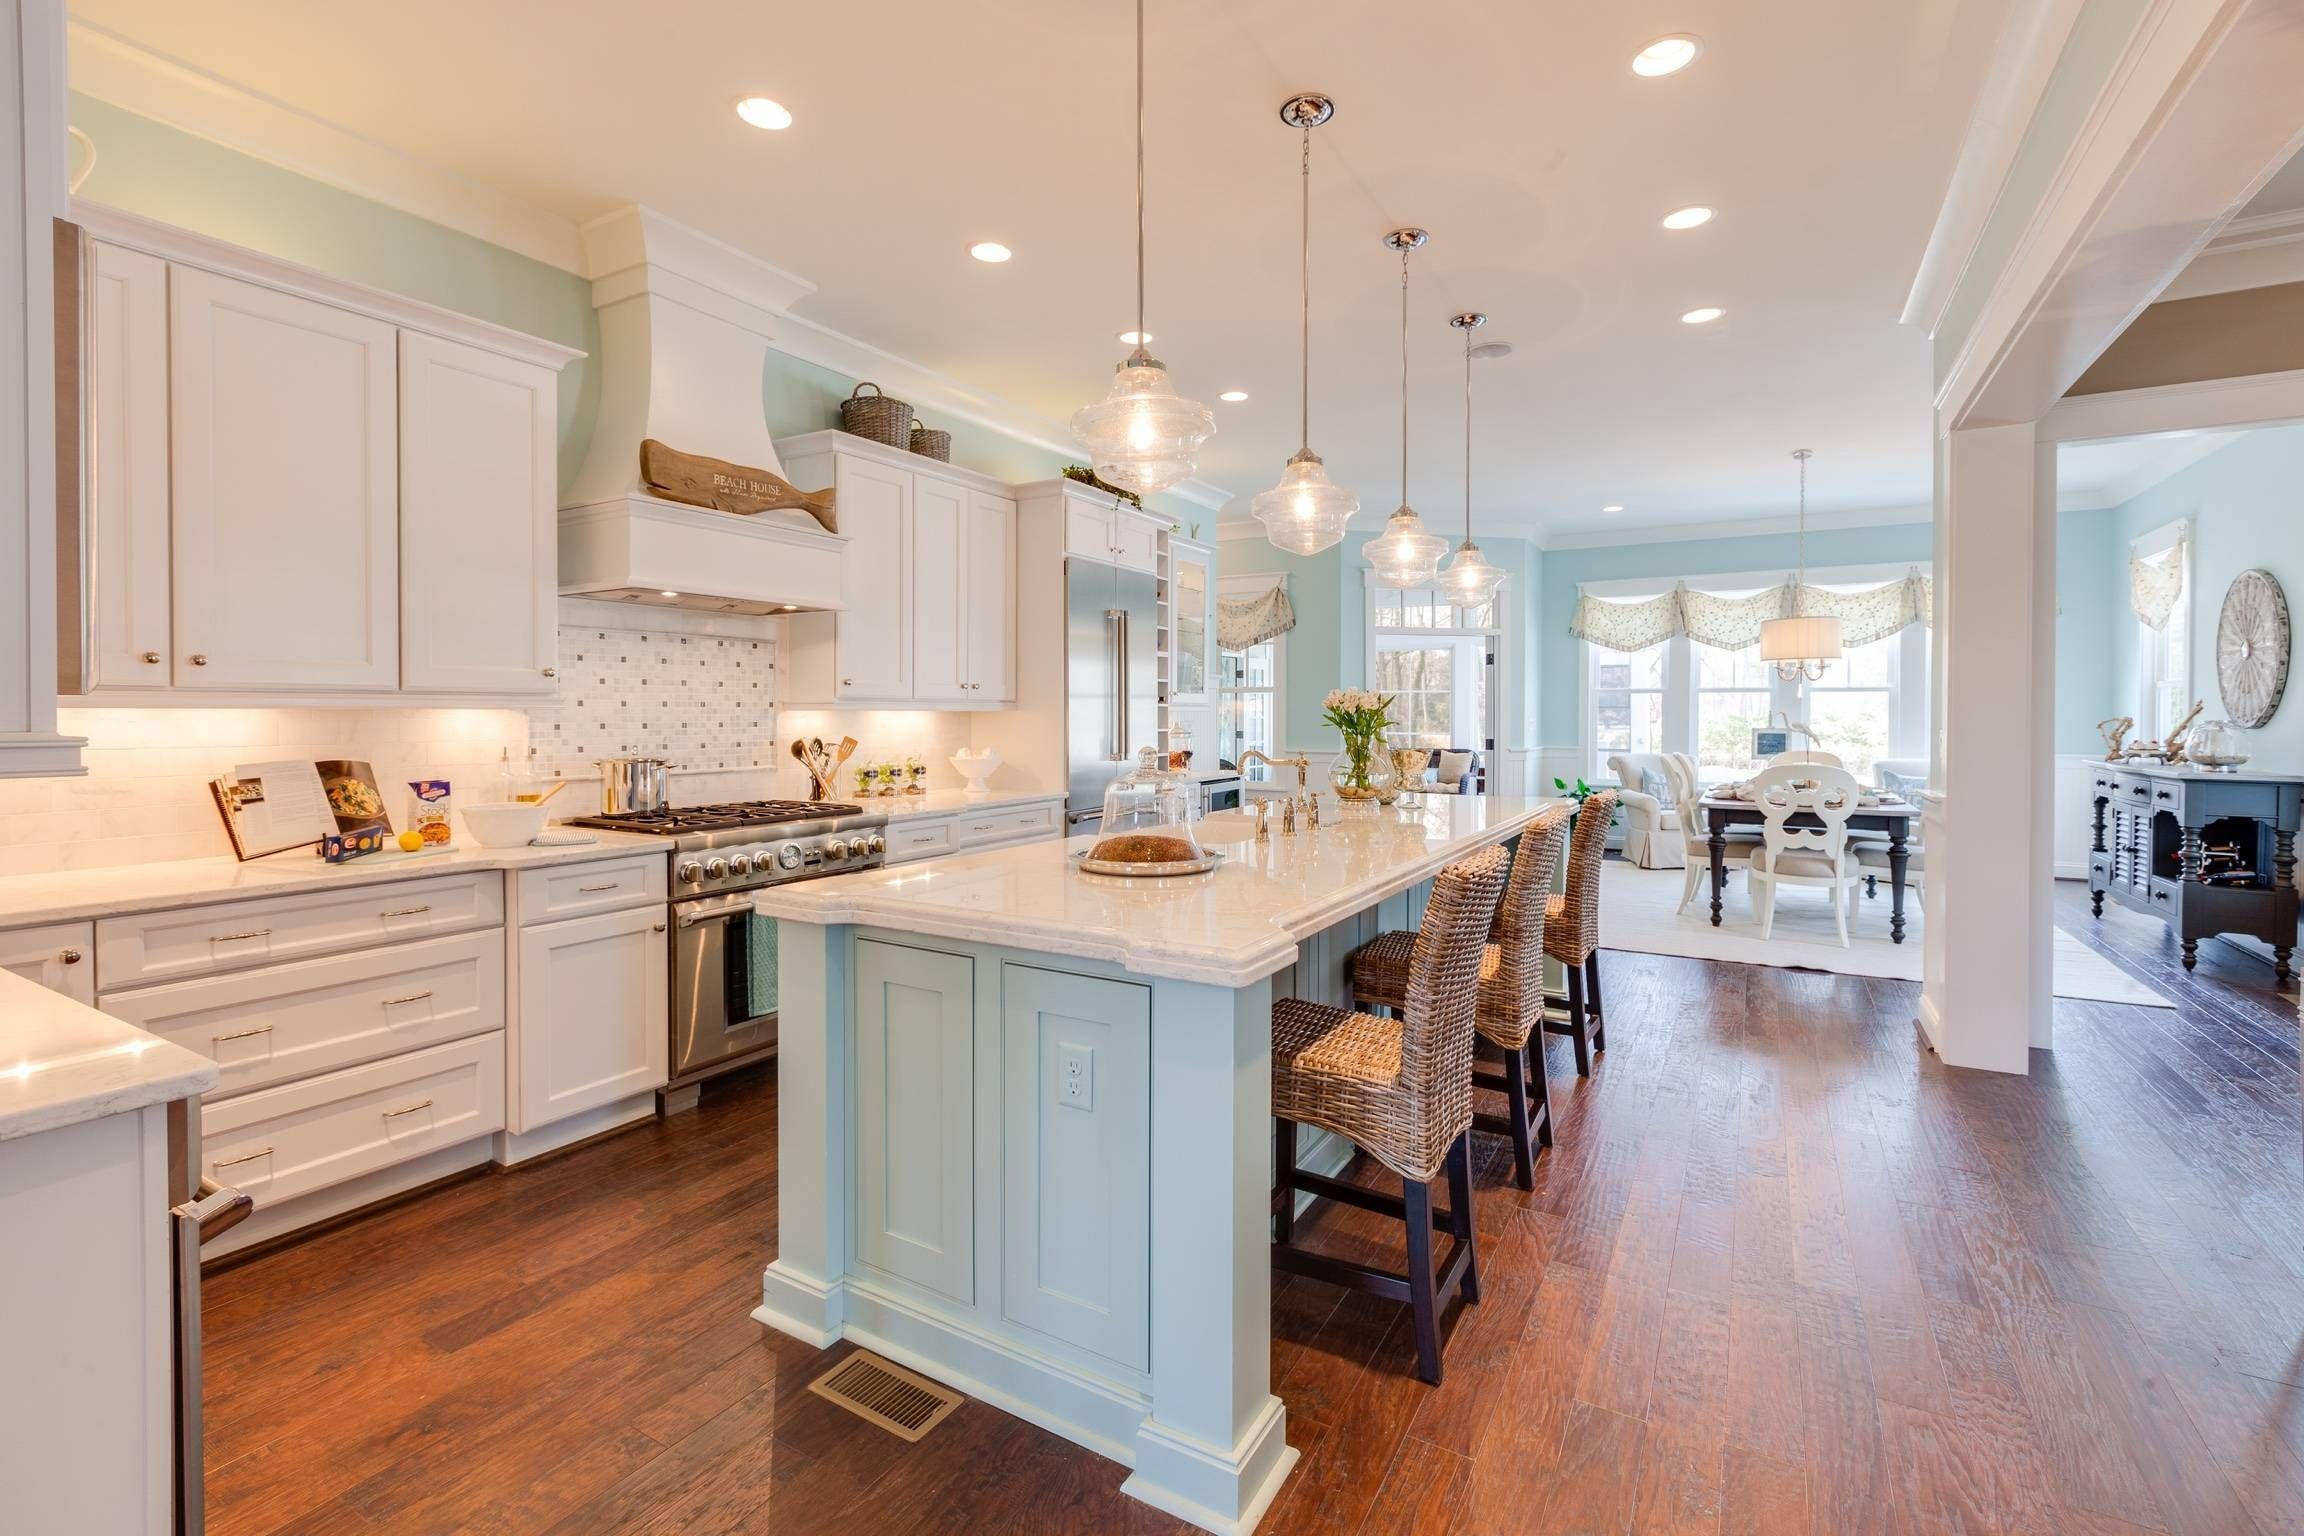 Reveal 83+ Alluring schoolhouse style kitchen lighting You Won't Be Disappointed